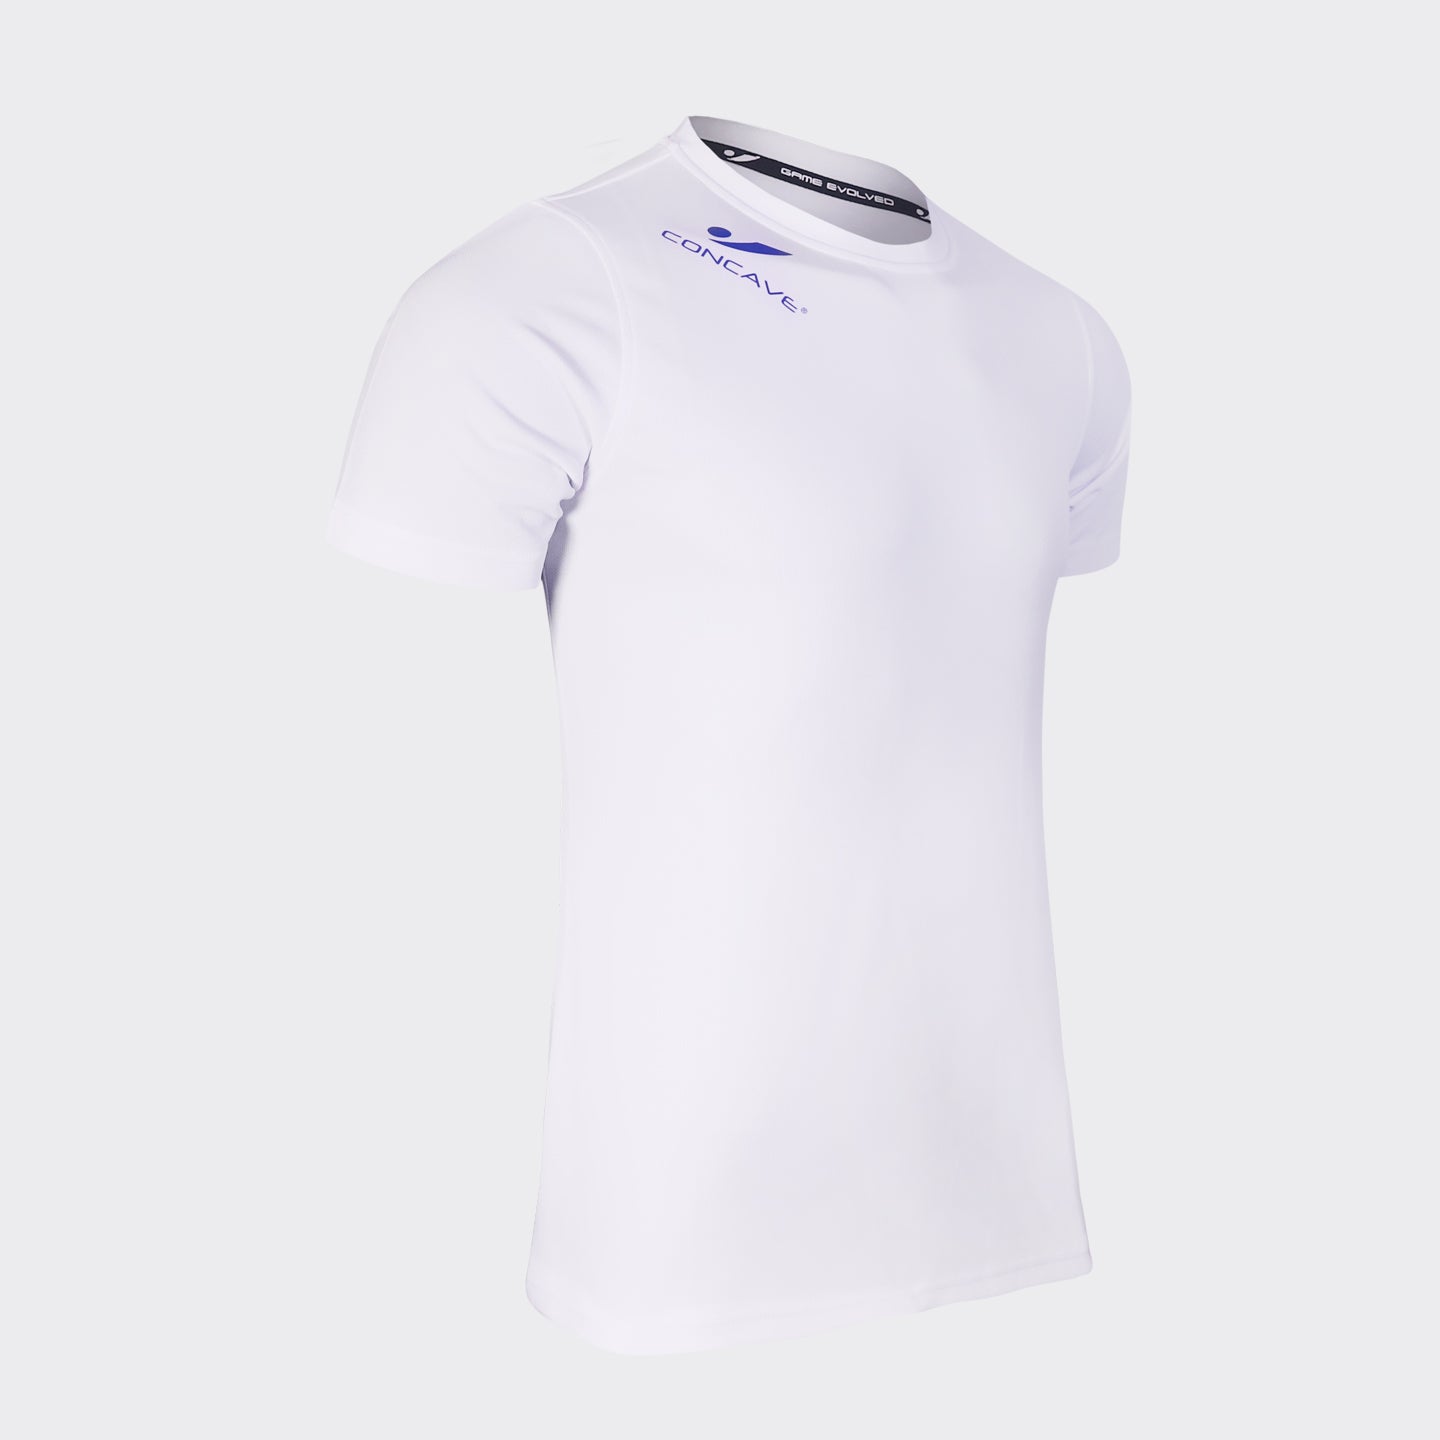 Cave Performance Top - White / Blue